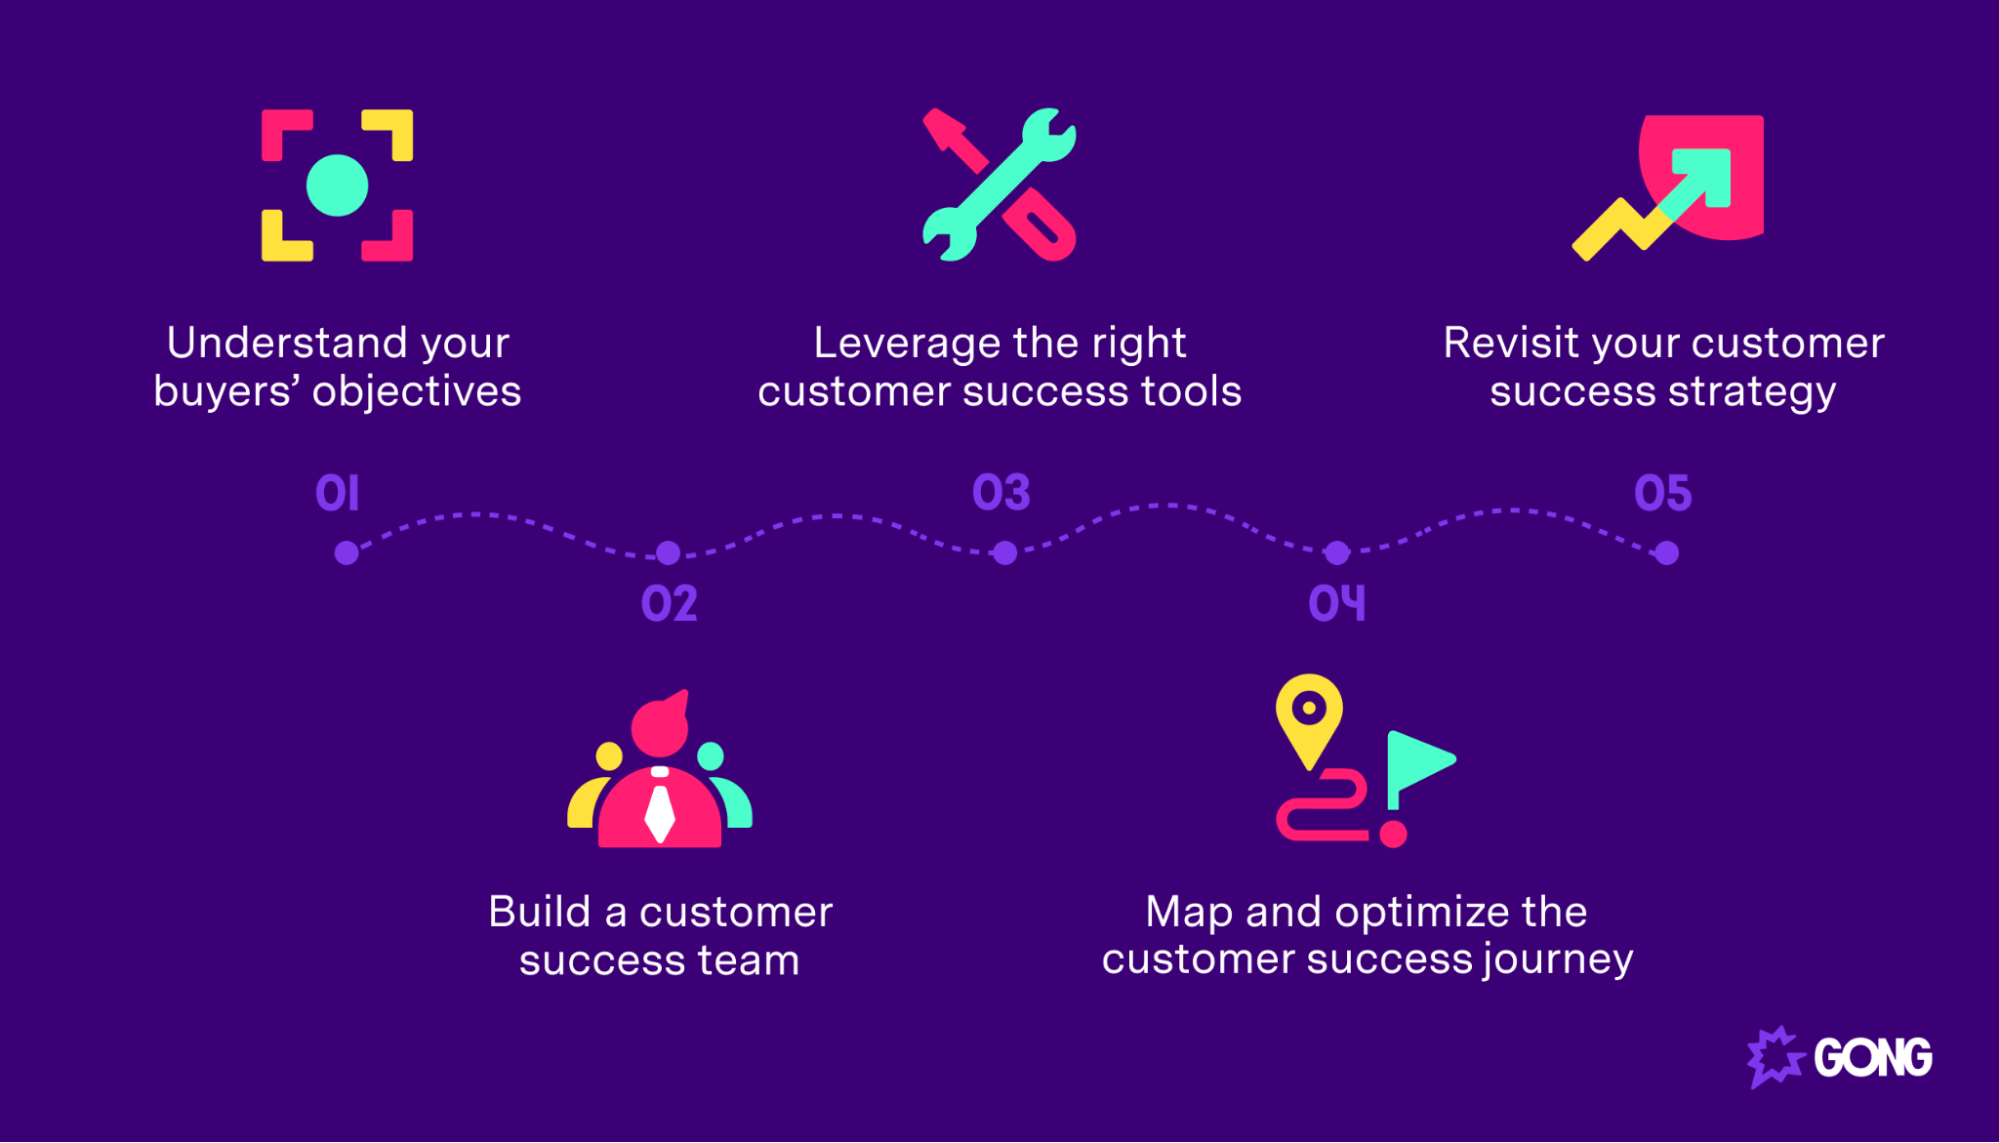 How to implement a customer success strategy